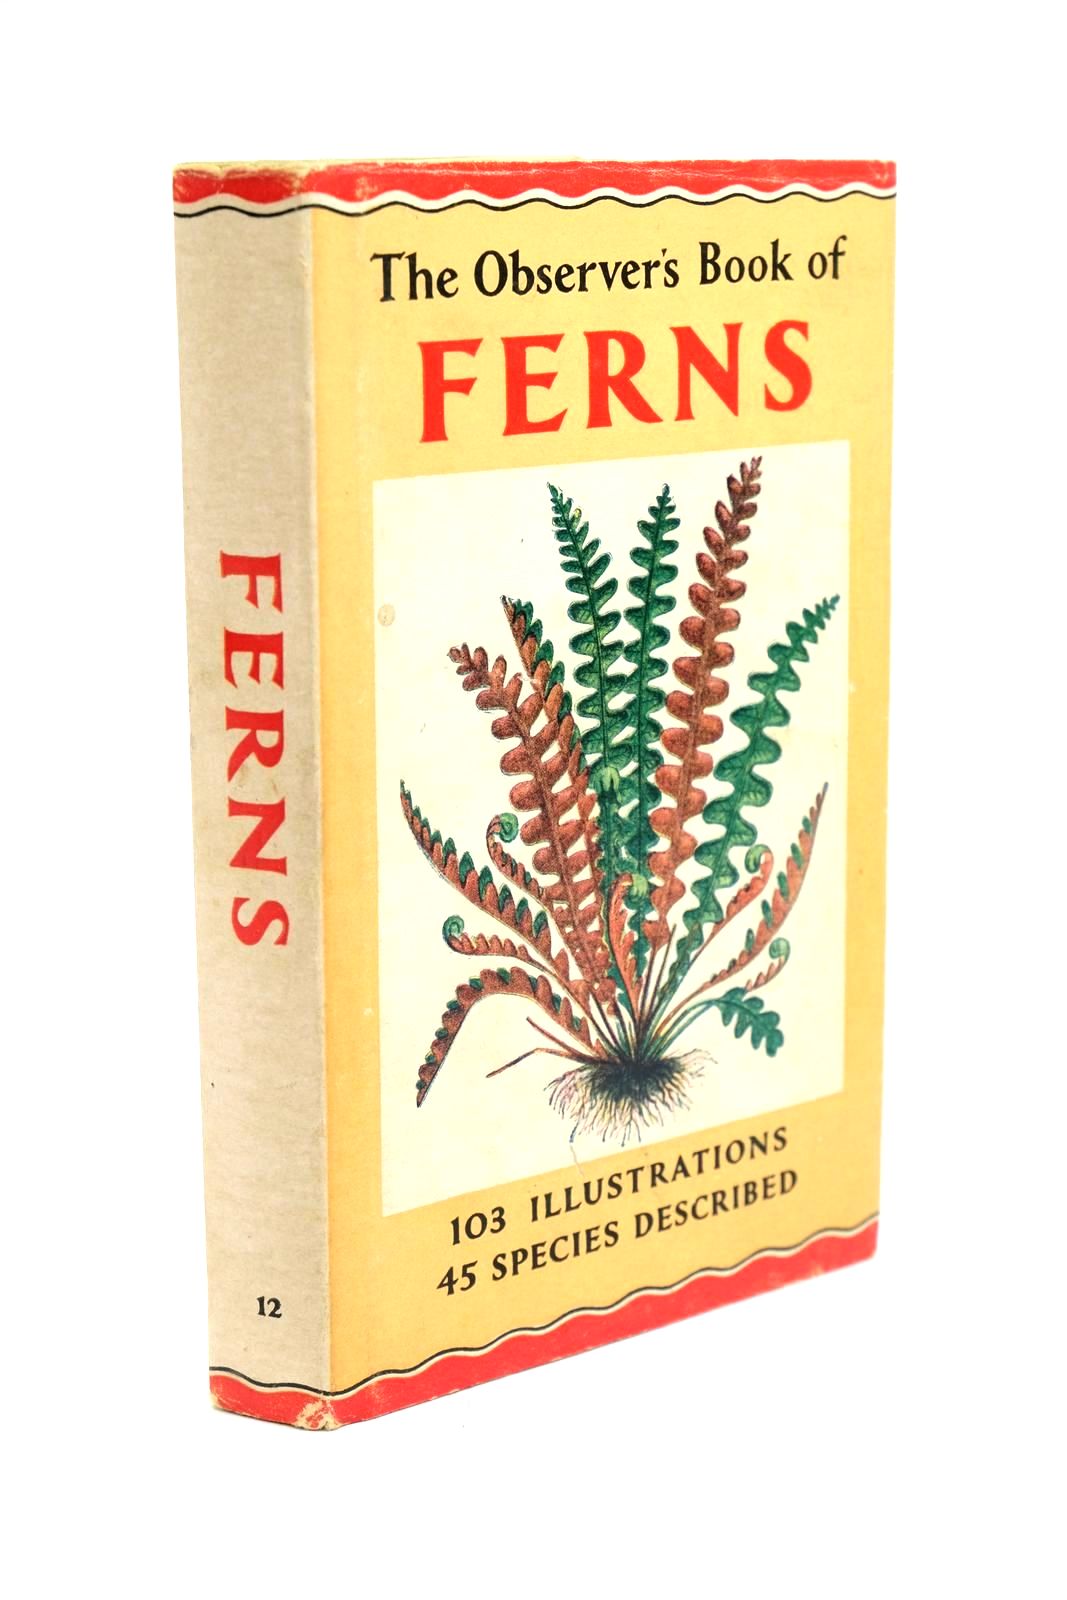 Photo of THE OBSERVER'S BOOK OF FERNS written by Rose, Francis
Stokoe, W.J. published by Frederick Warne & Co Ltd. (STOCK CODE: 1321421)  for sale by Stella & Rose's Books